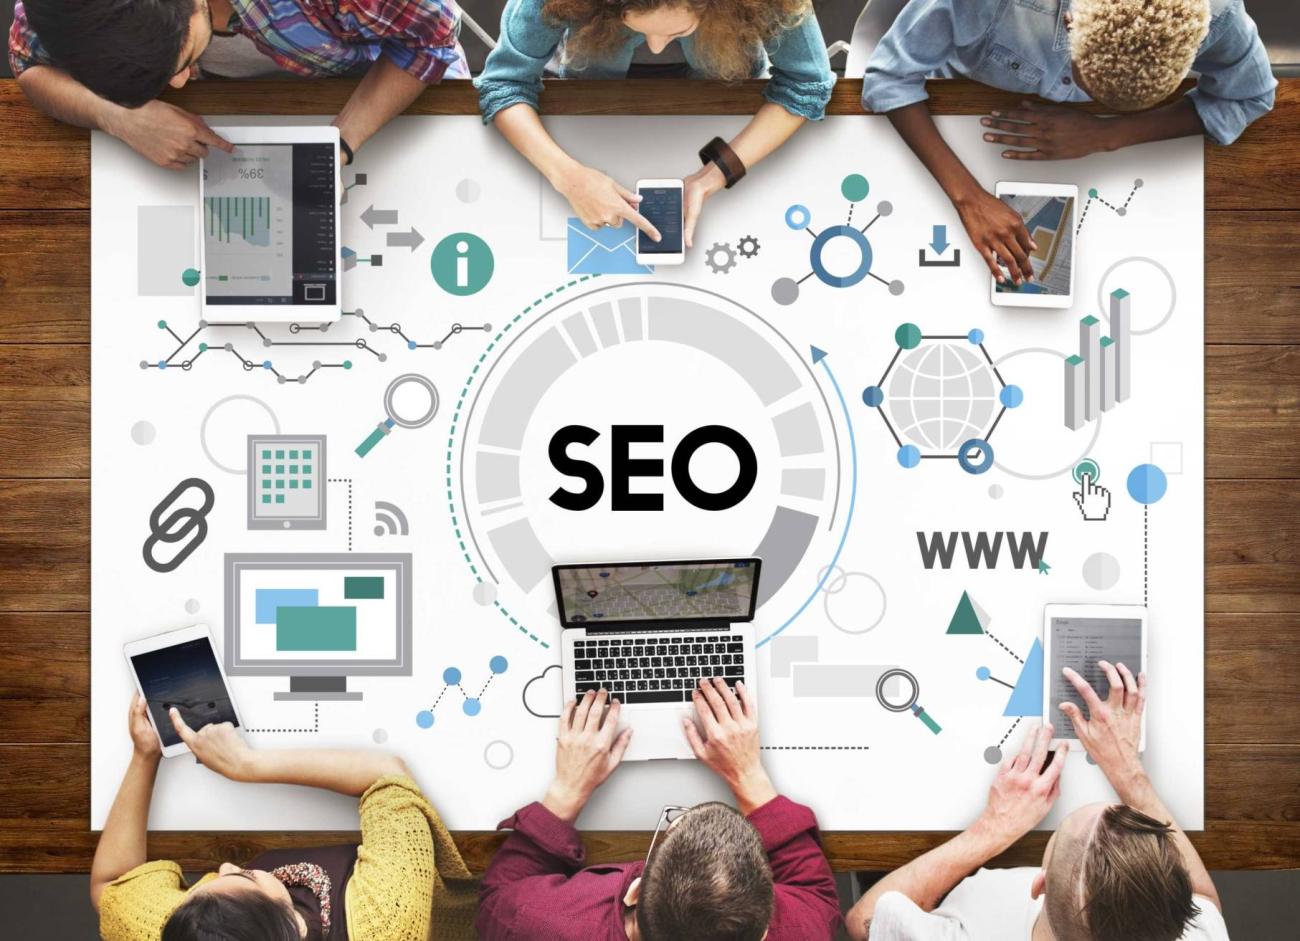 How Can I Get Started As A Freelance SEO Specialist?